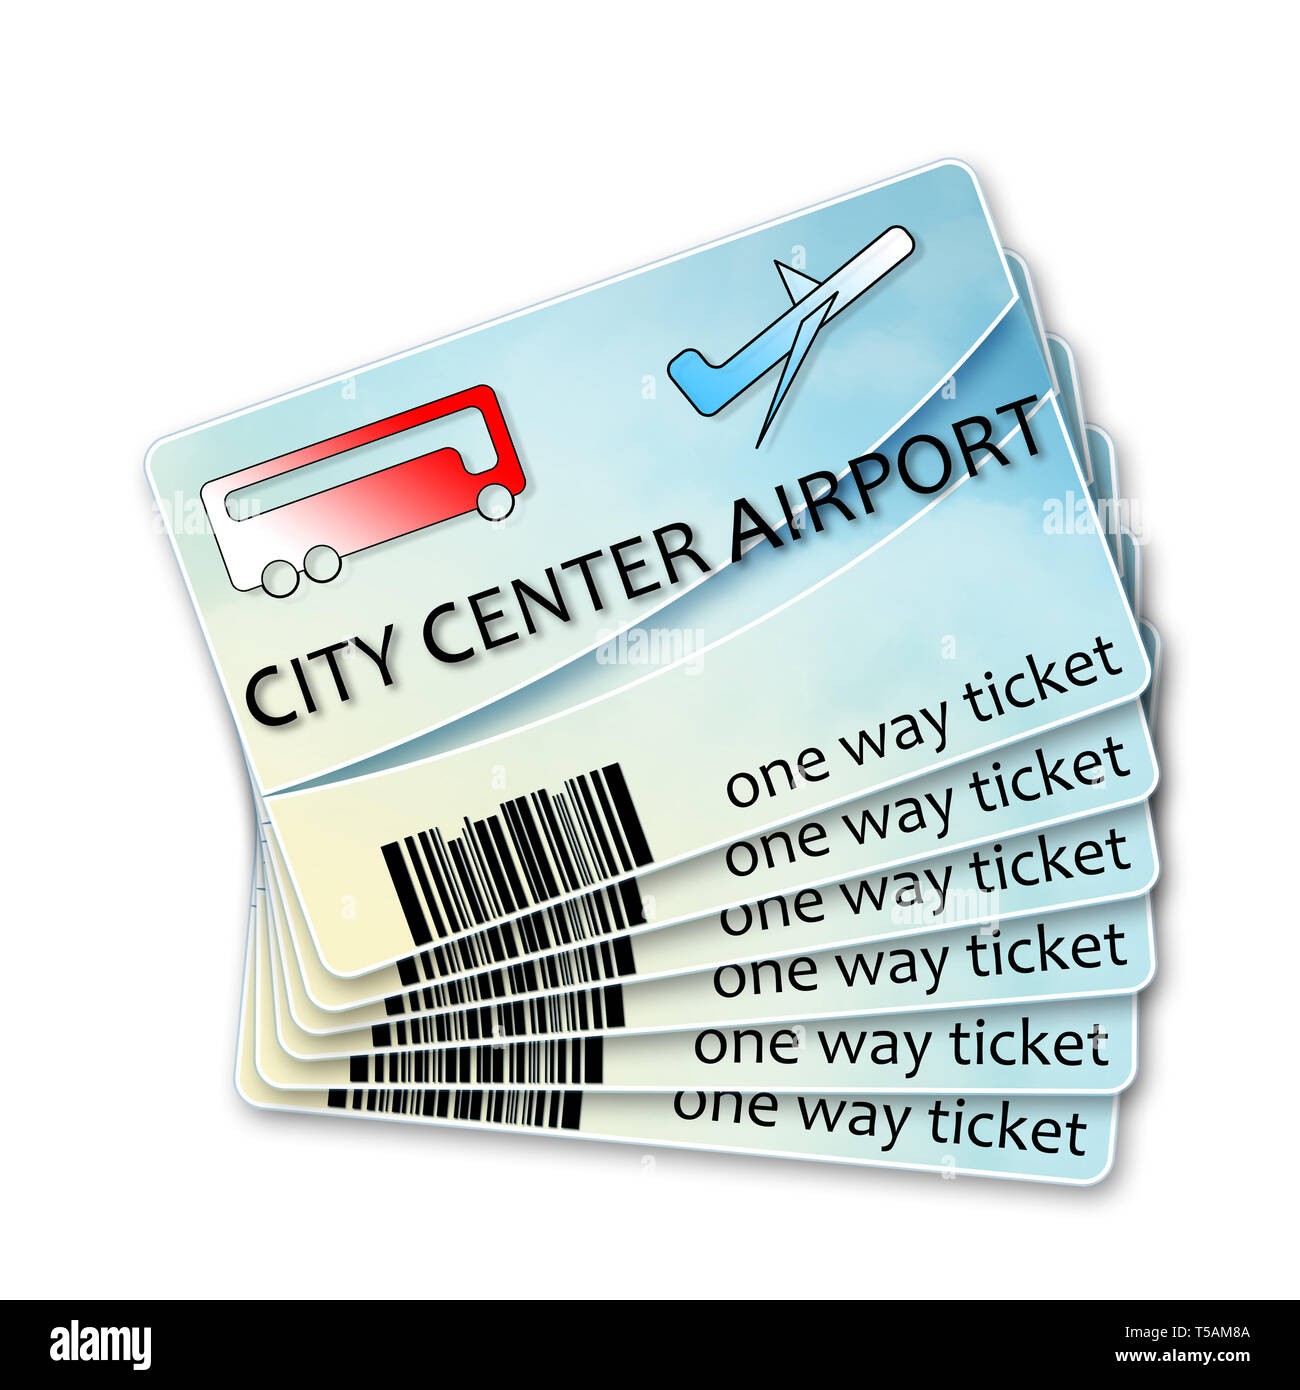 Bus tickets from city center to airport and return - concept image Stock Photo